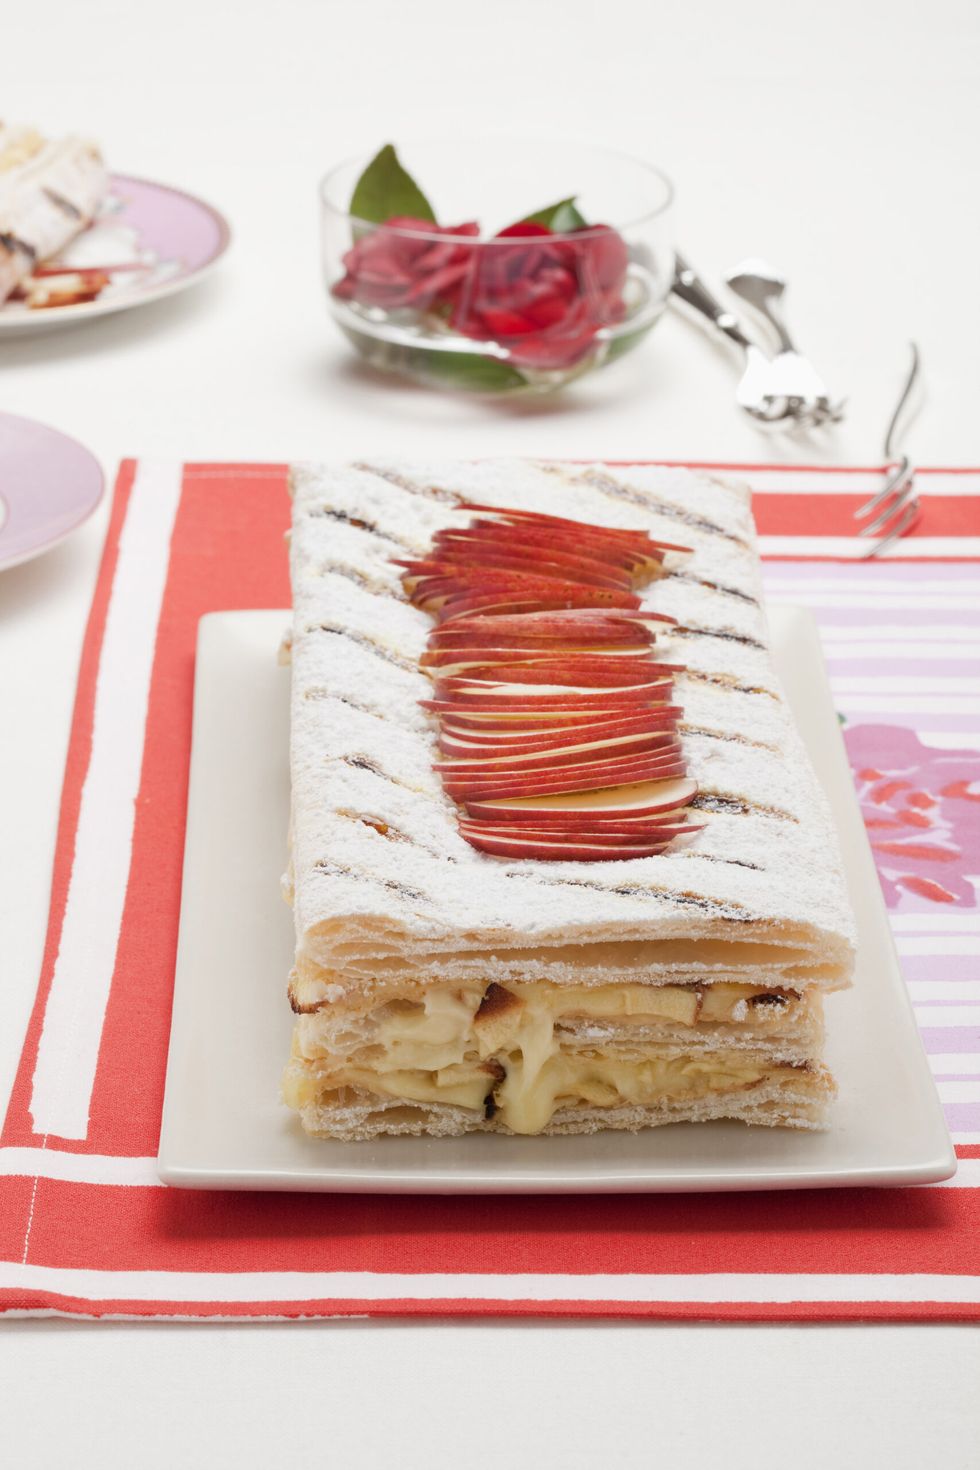 Millefeuille pastry